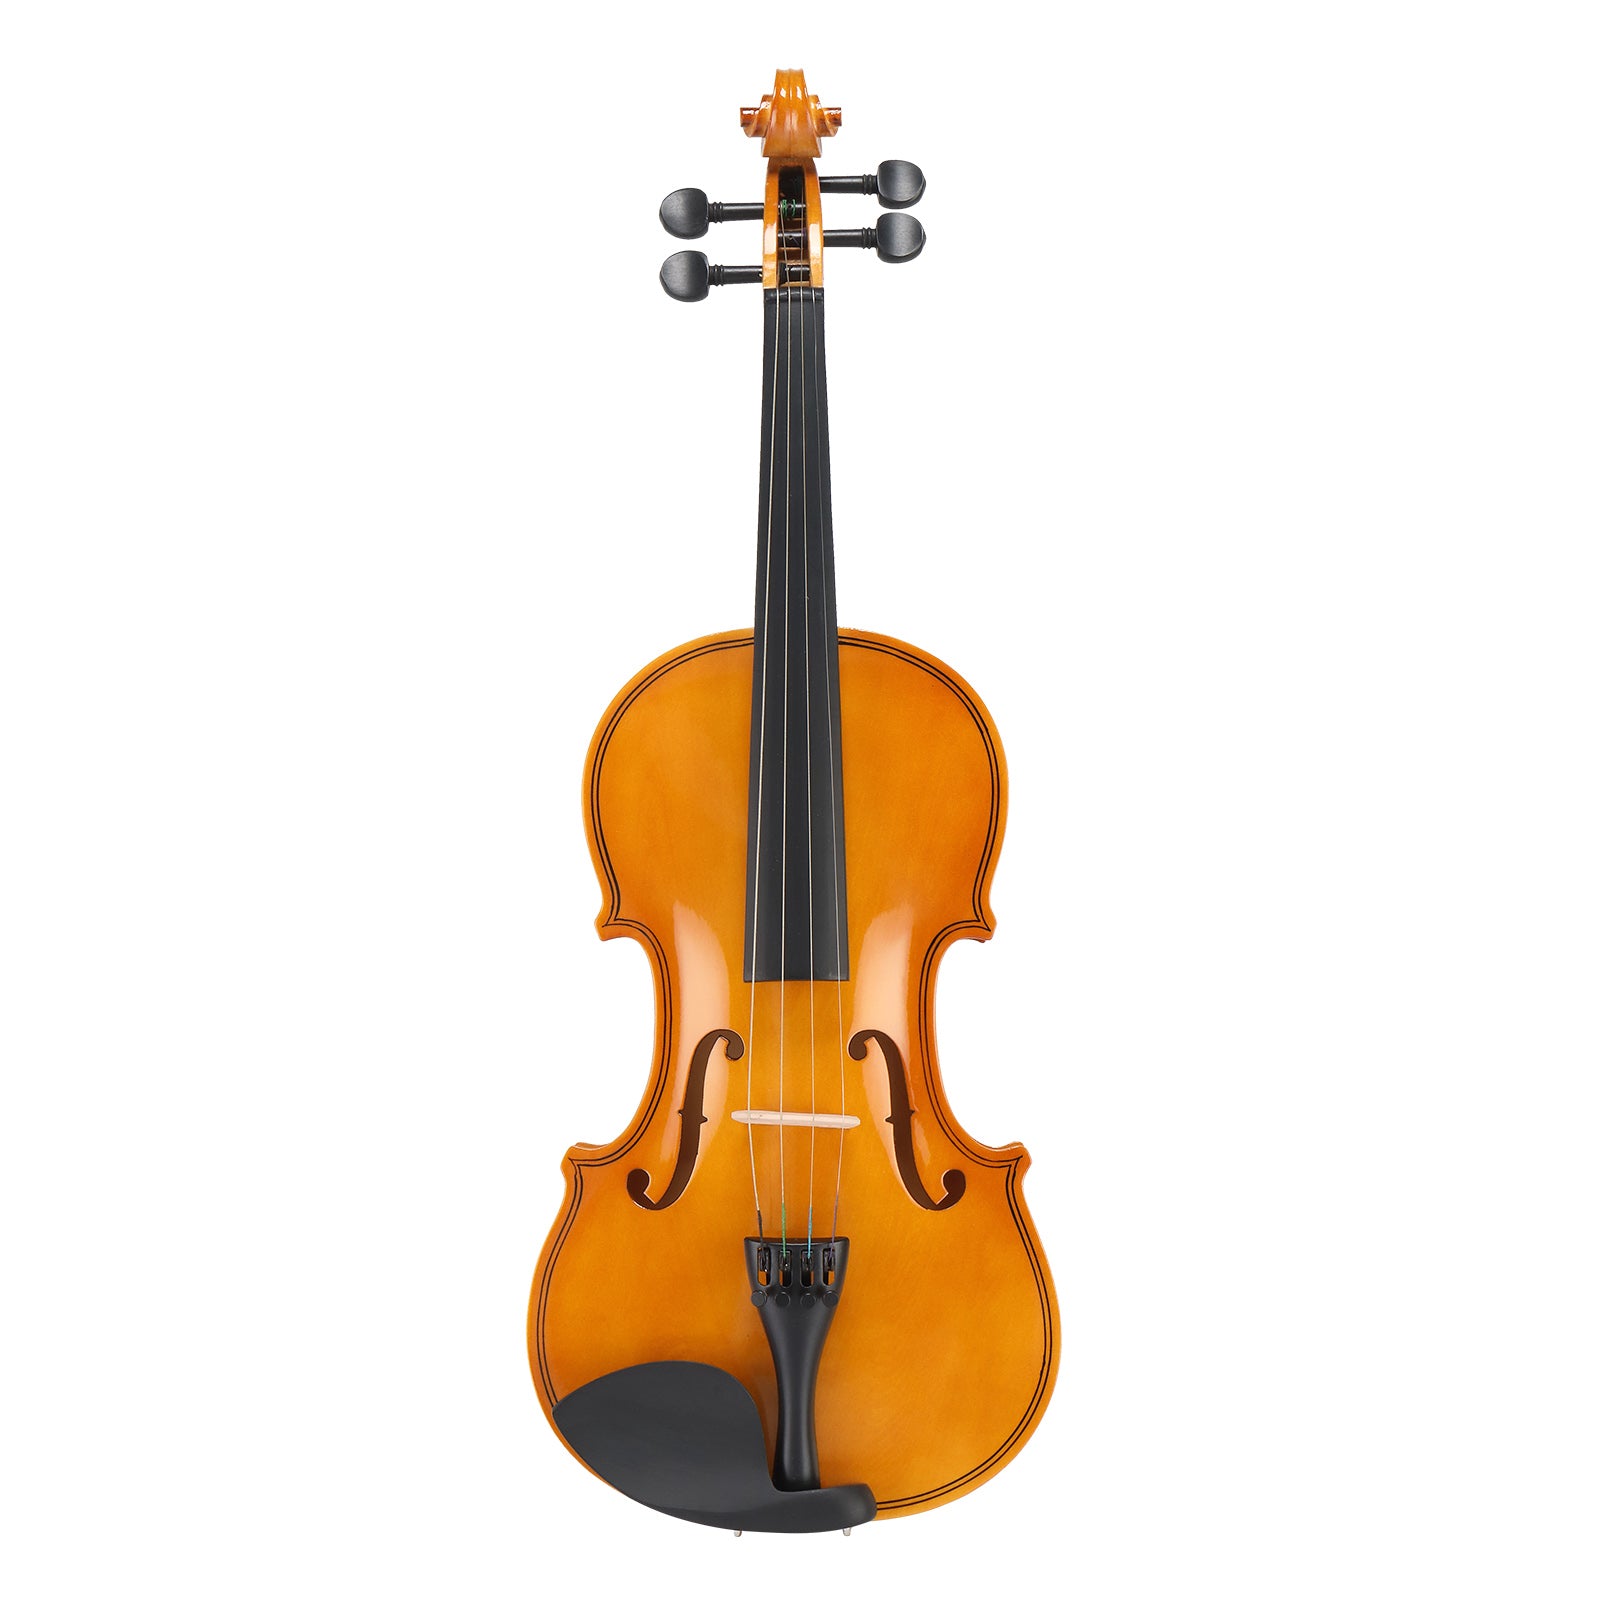 ZNTS Full Size 4/4 Violin Set for Adults Beginners Students with Hard Case,Violin 08941007